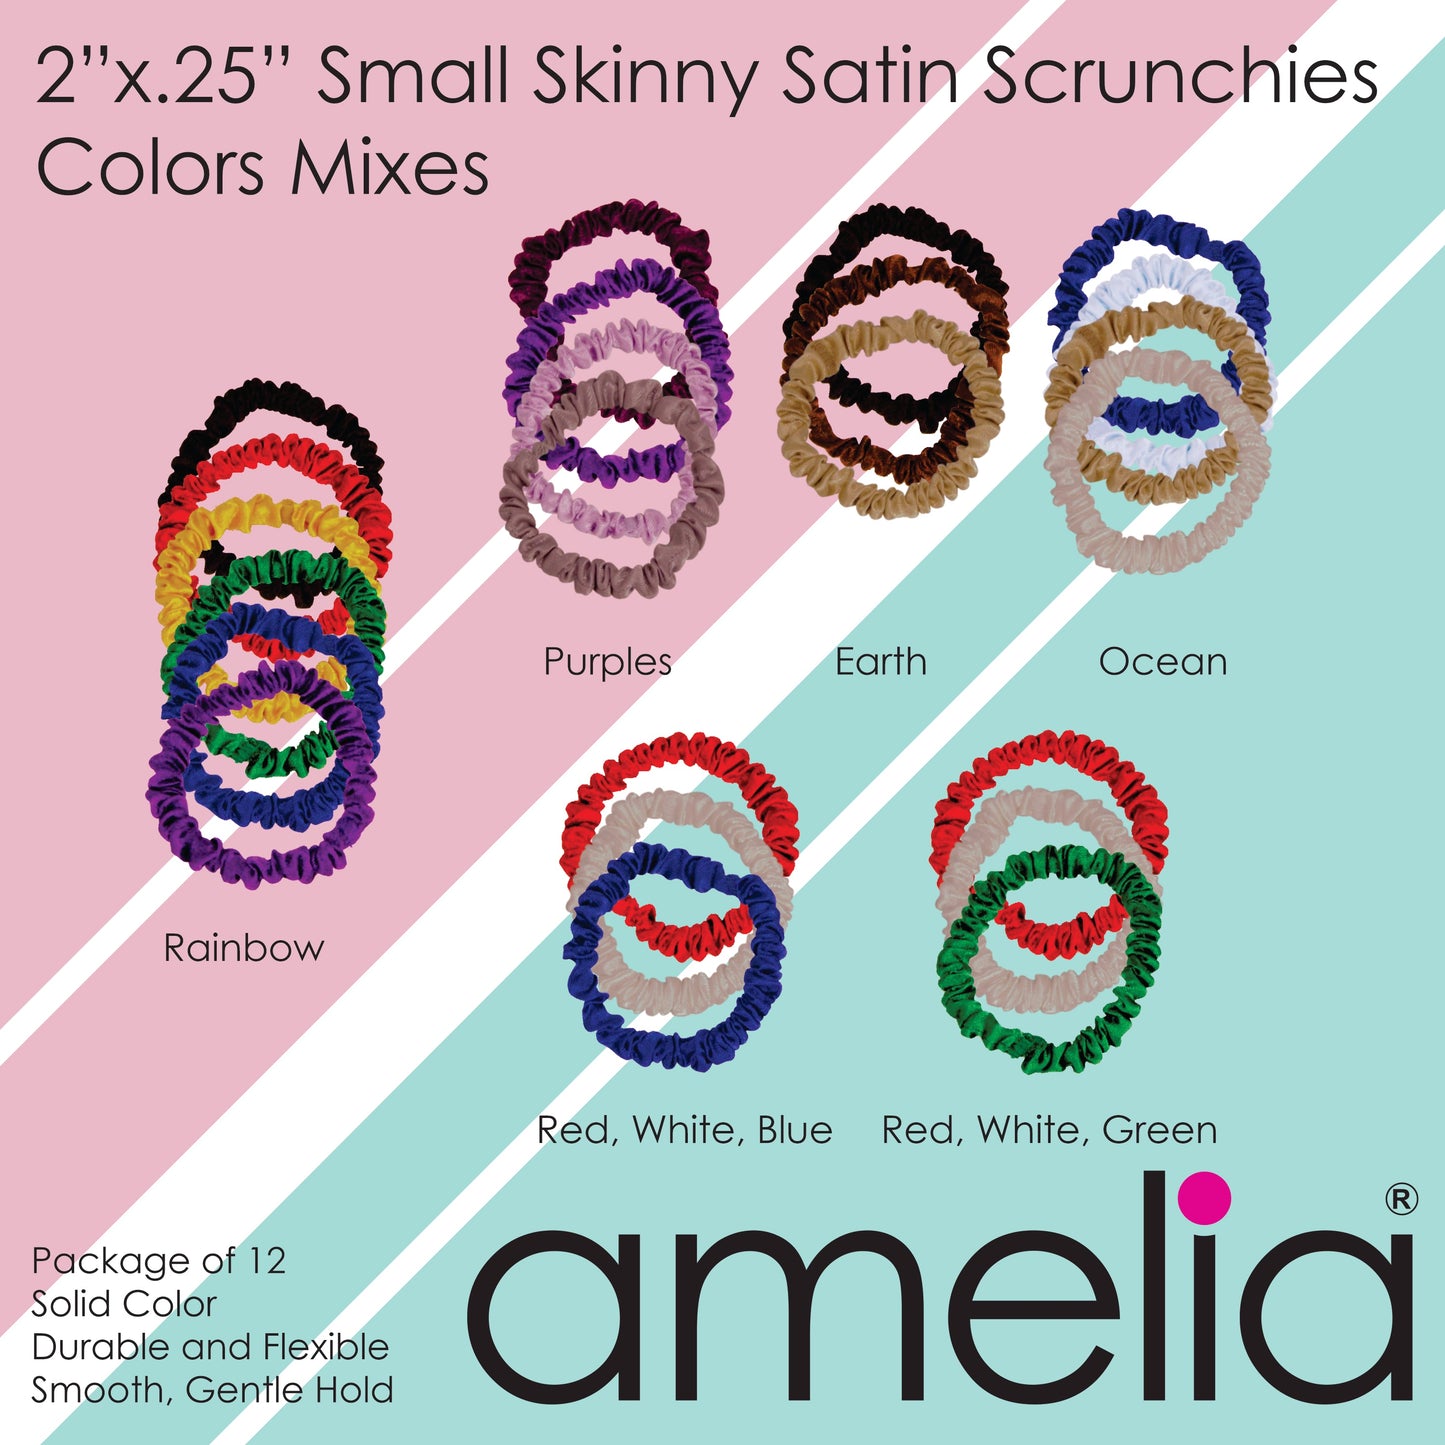 Amelia Beauty, Sky Blue Skinny Satin Scrunchies, 2in Diameter, Gentle and Strong Hold, No Snag, No Dents or Creases. 12 Pack